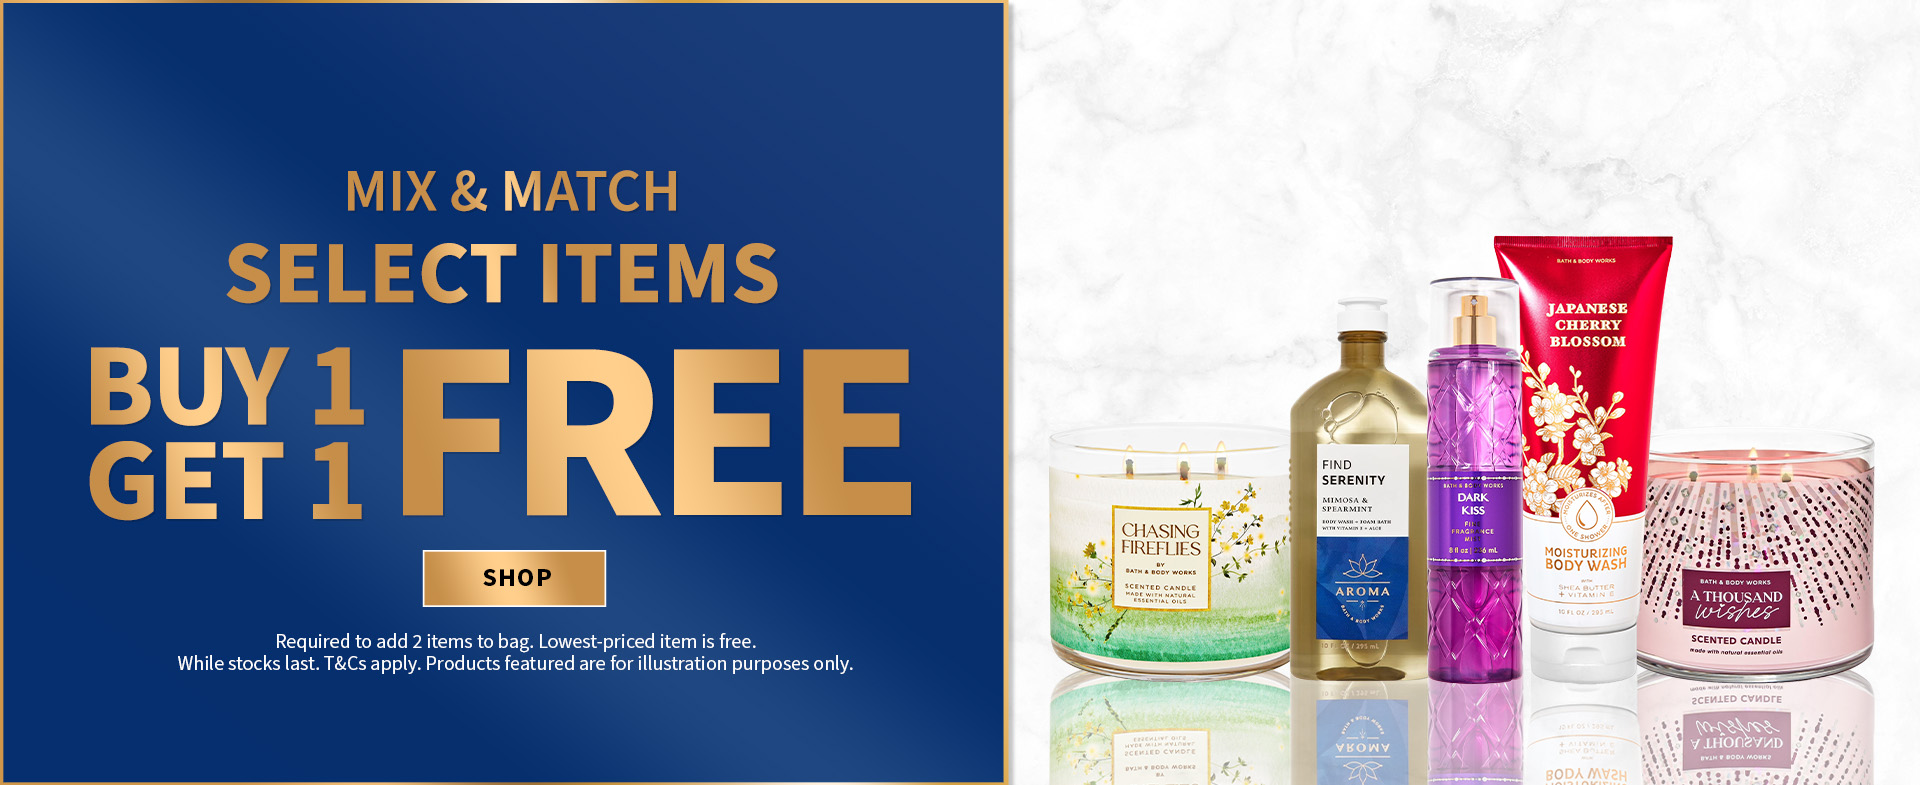 Mix And Match Sitewide Buy 1 Get 1 Free